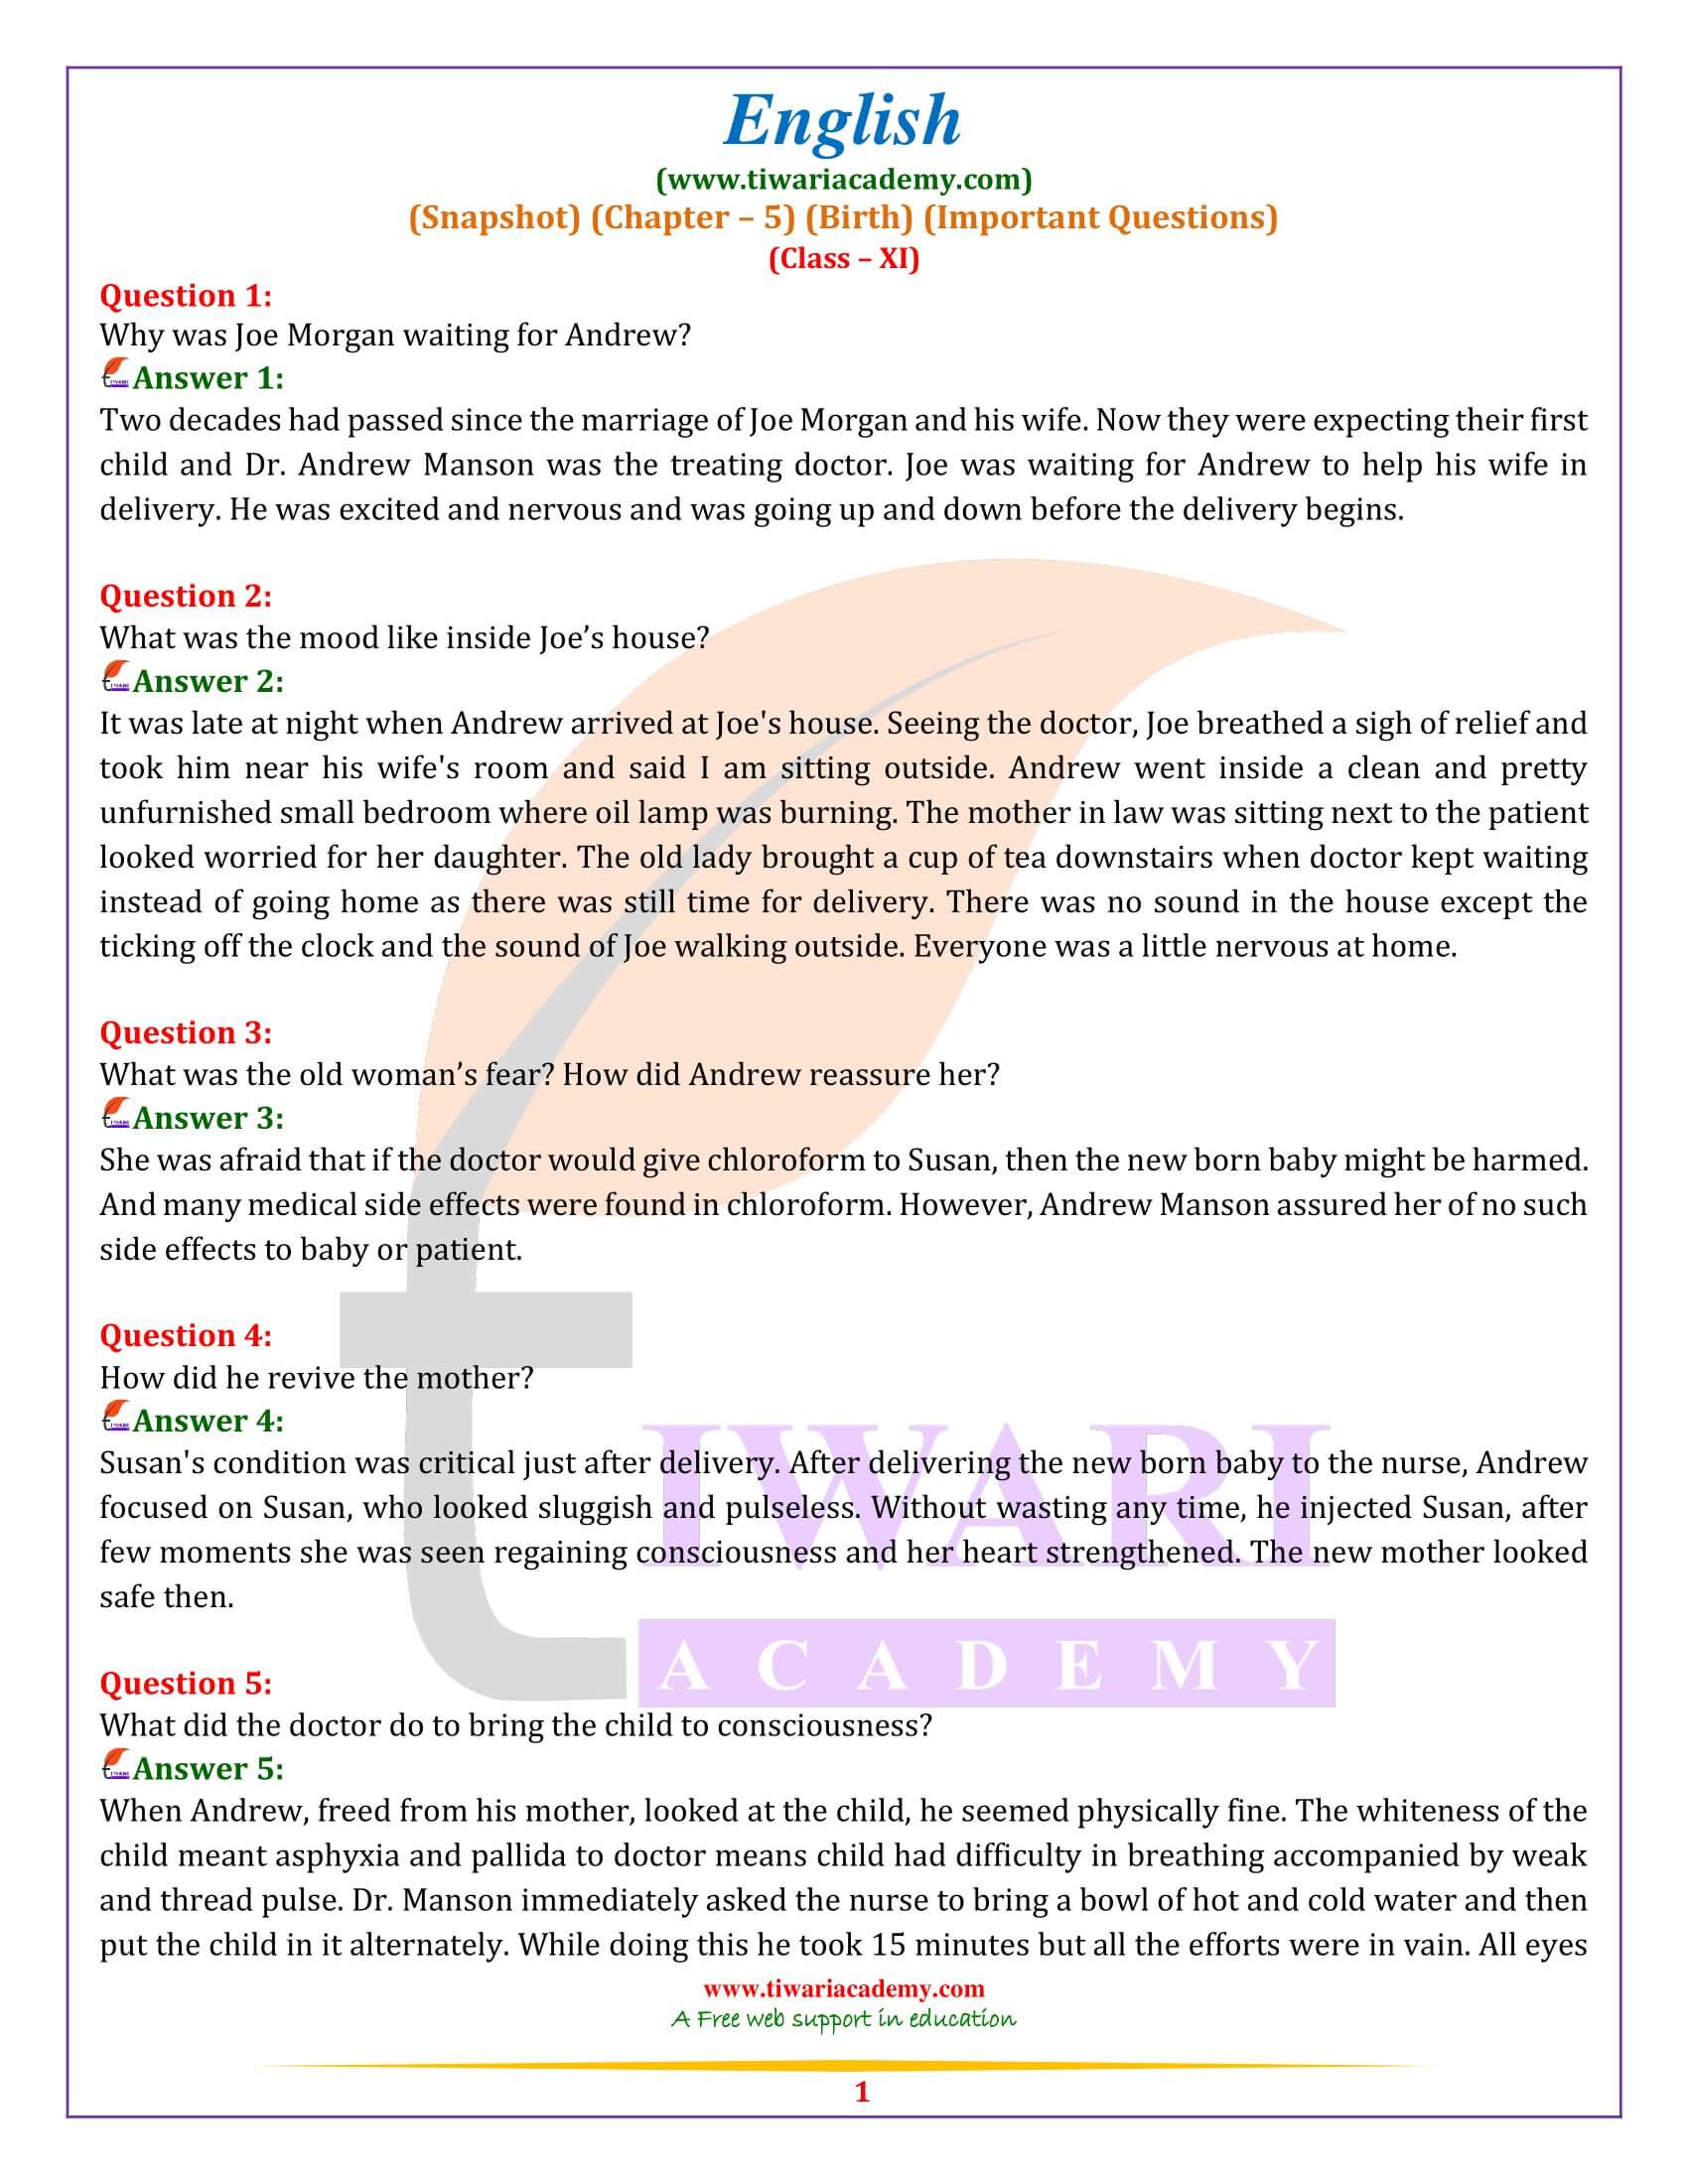 Class 11 English Snapshots Chapter 5 Important Questions